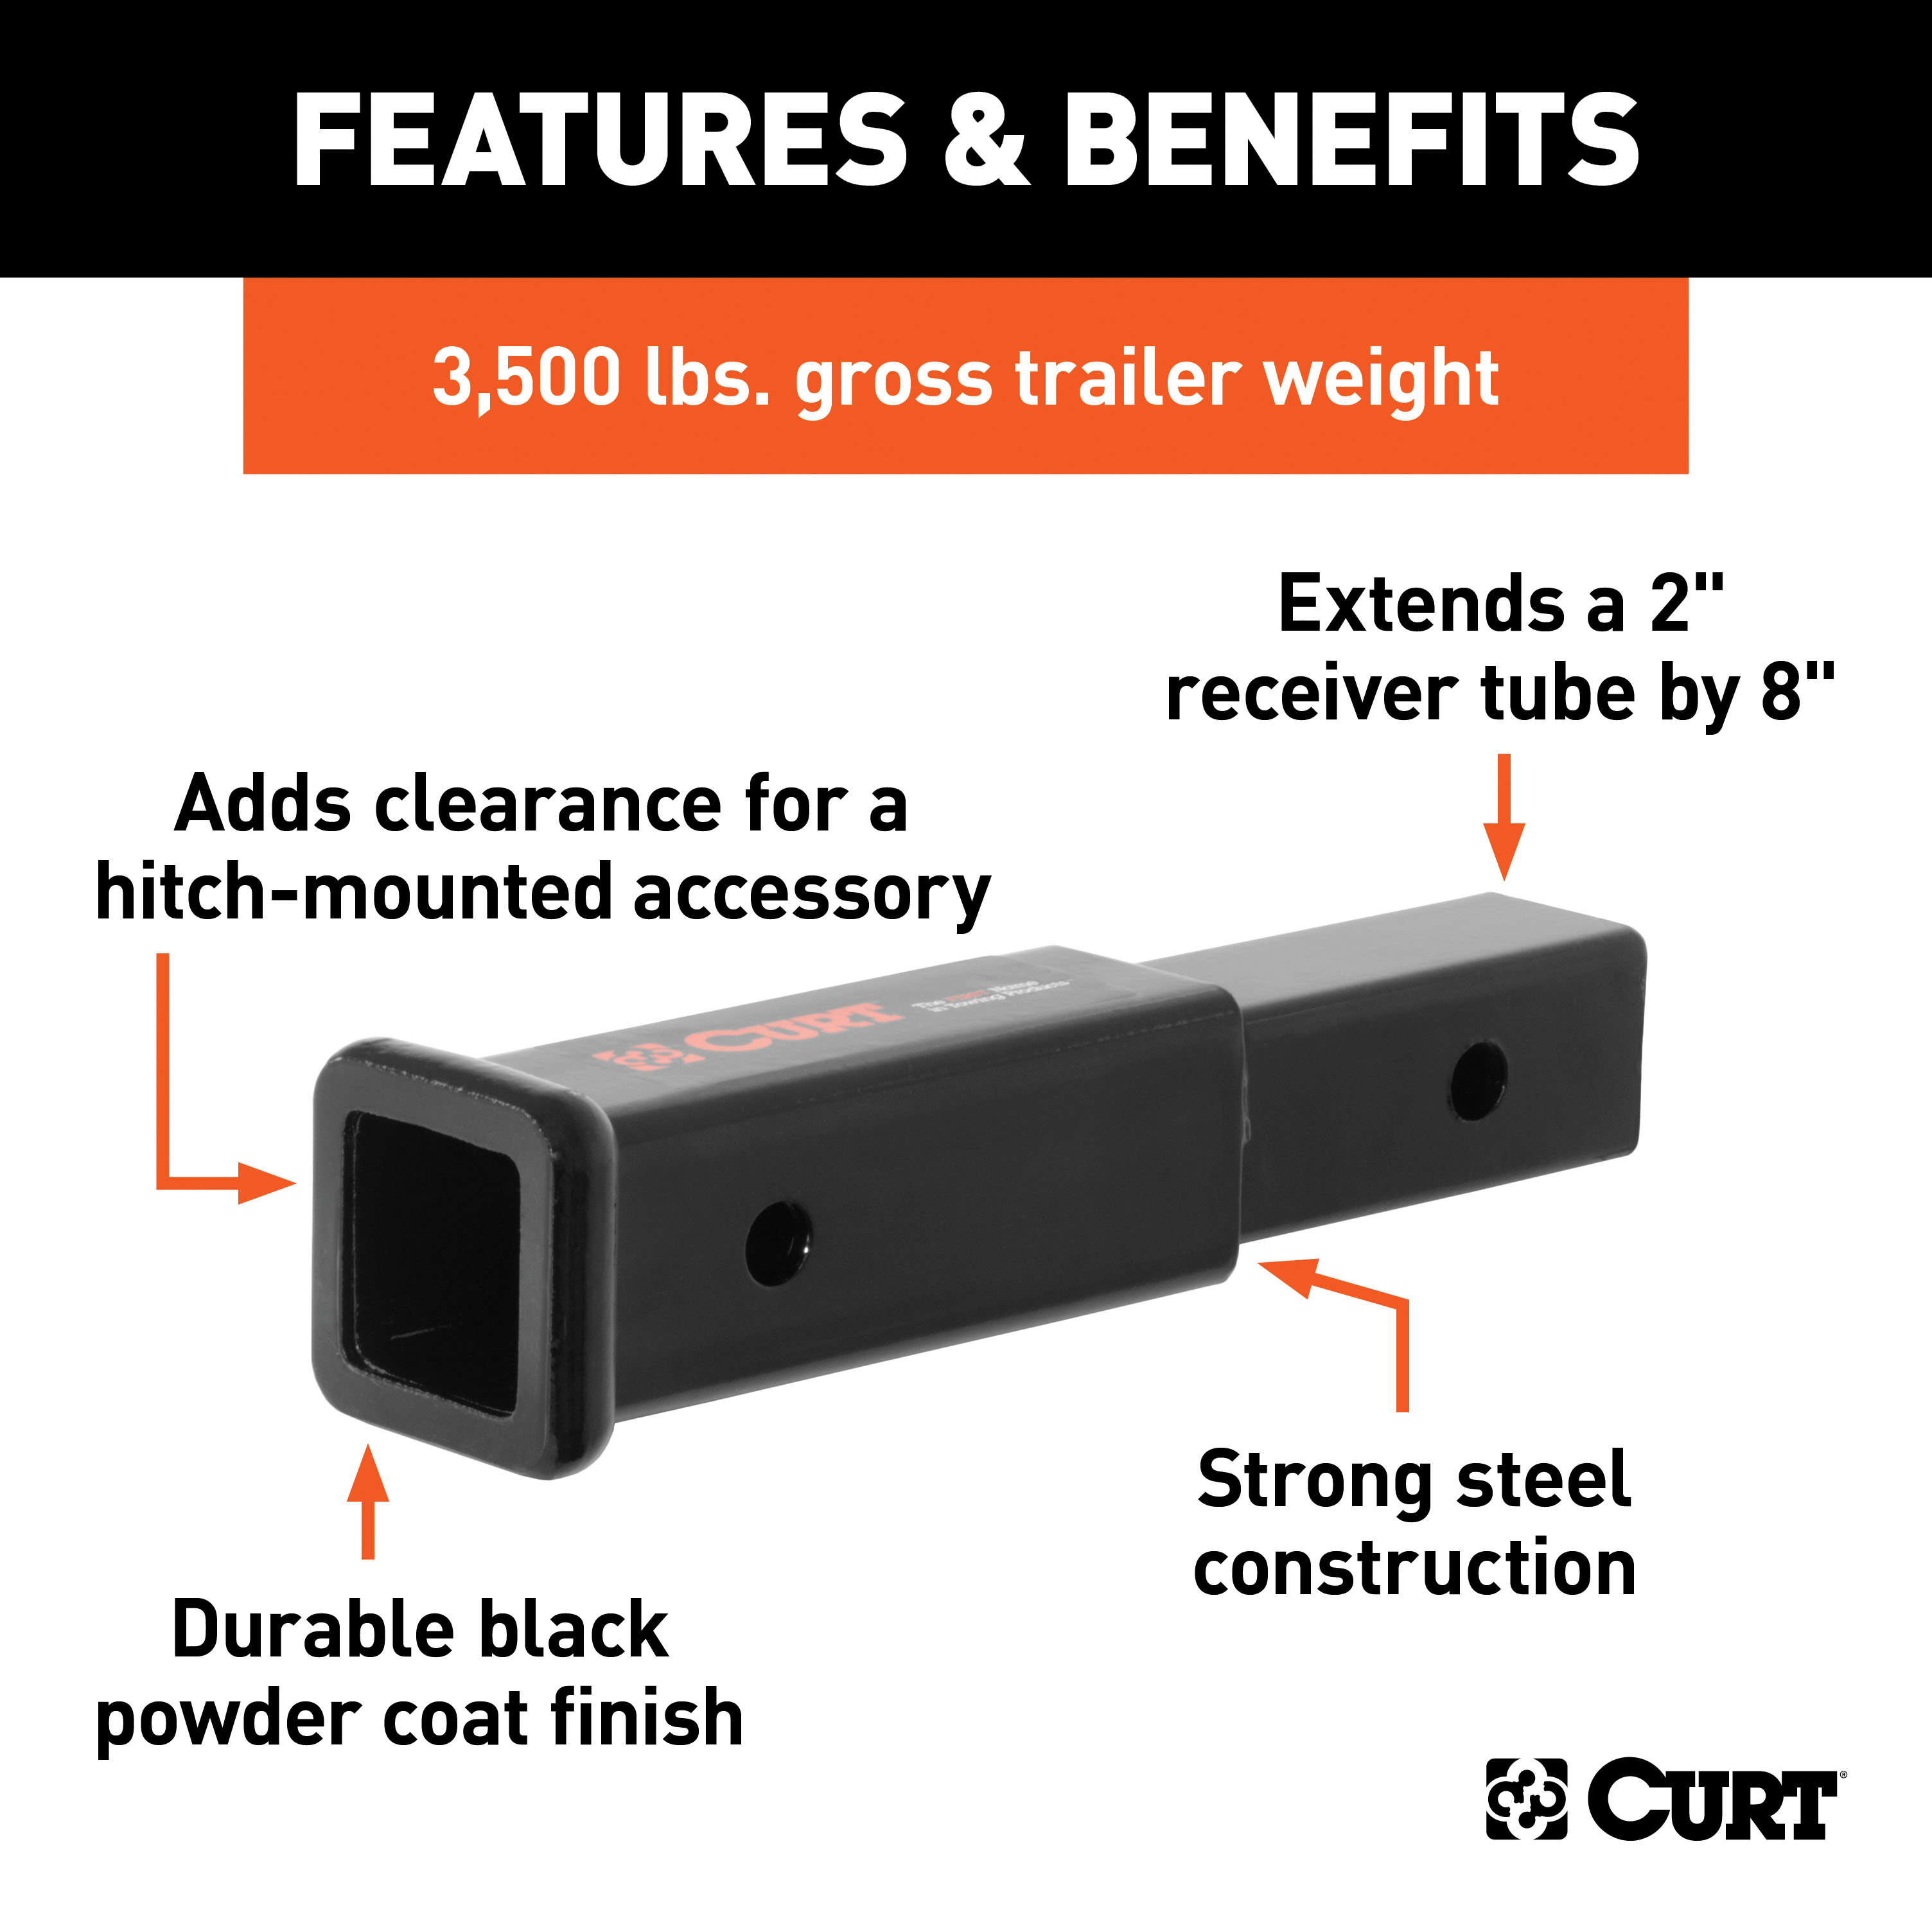 Curt 45791 8 Inch 3500 Pound Trailer Hitch Receiver Tube Extension with 2" Shank - image 2 of 4